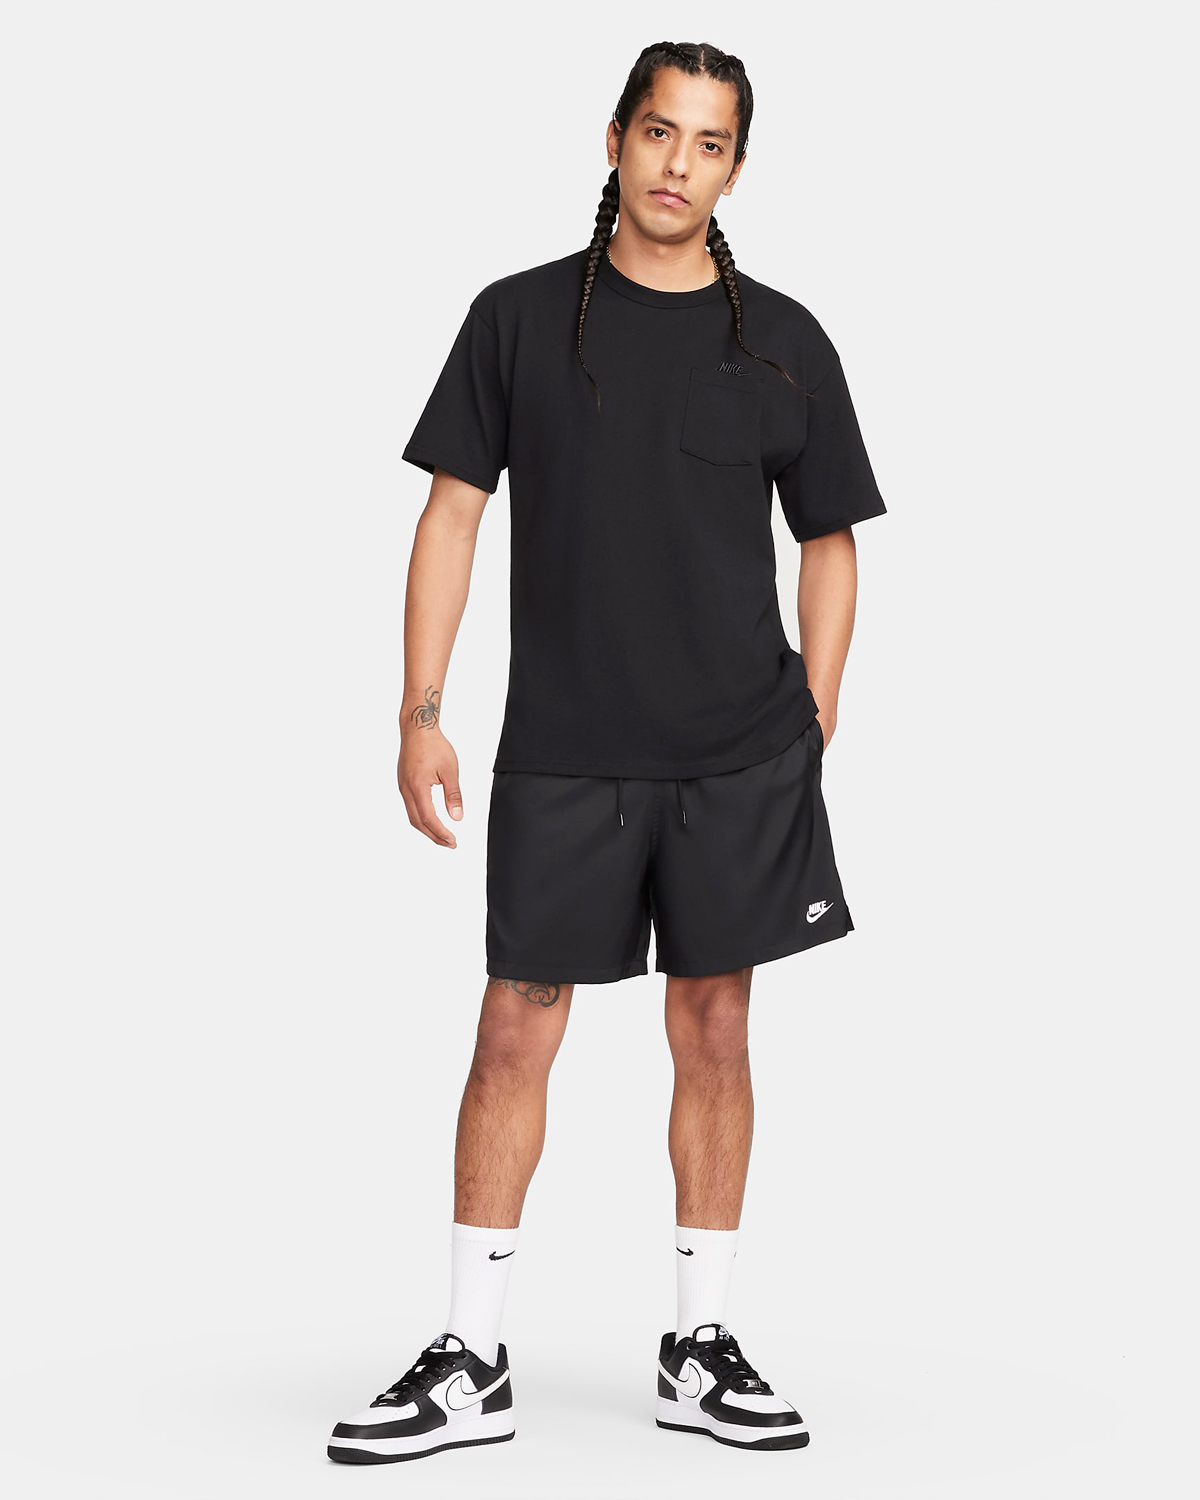 Nike-Club-Woven-Flow-Shorts-Black-White-Outfit